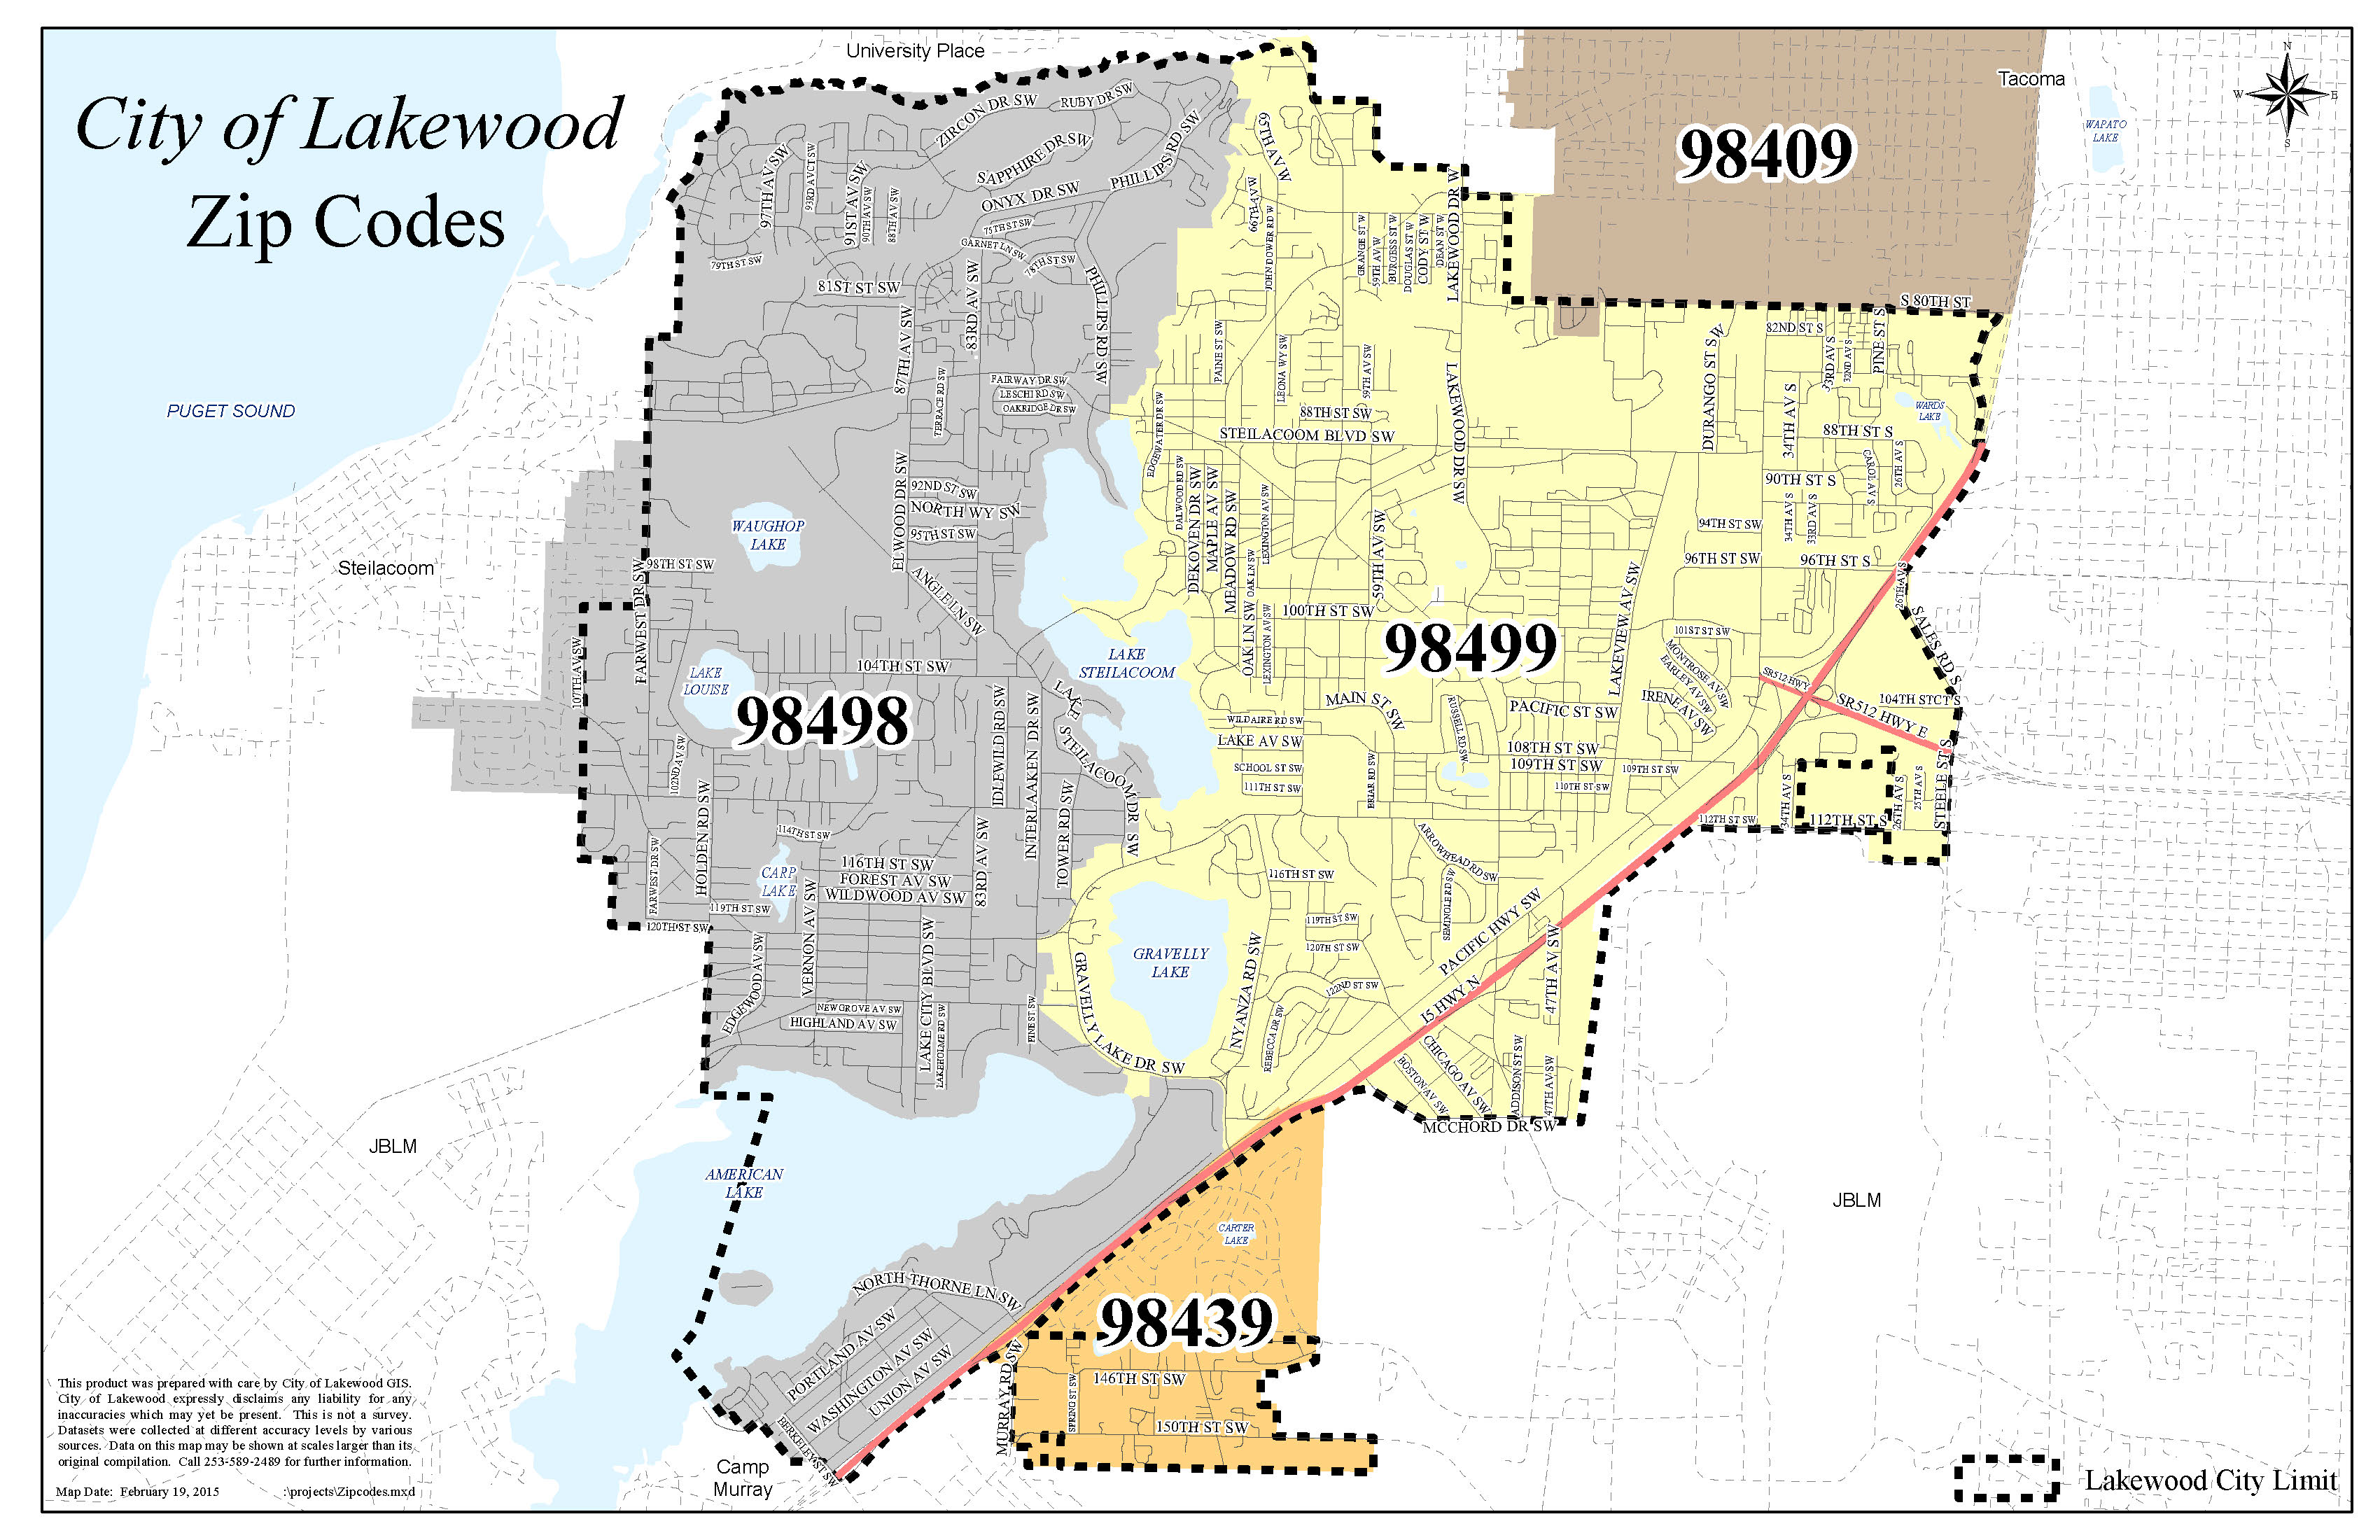 Current Planning and Zoning | City of Lakewood